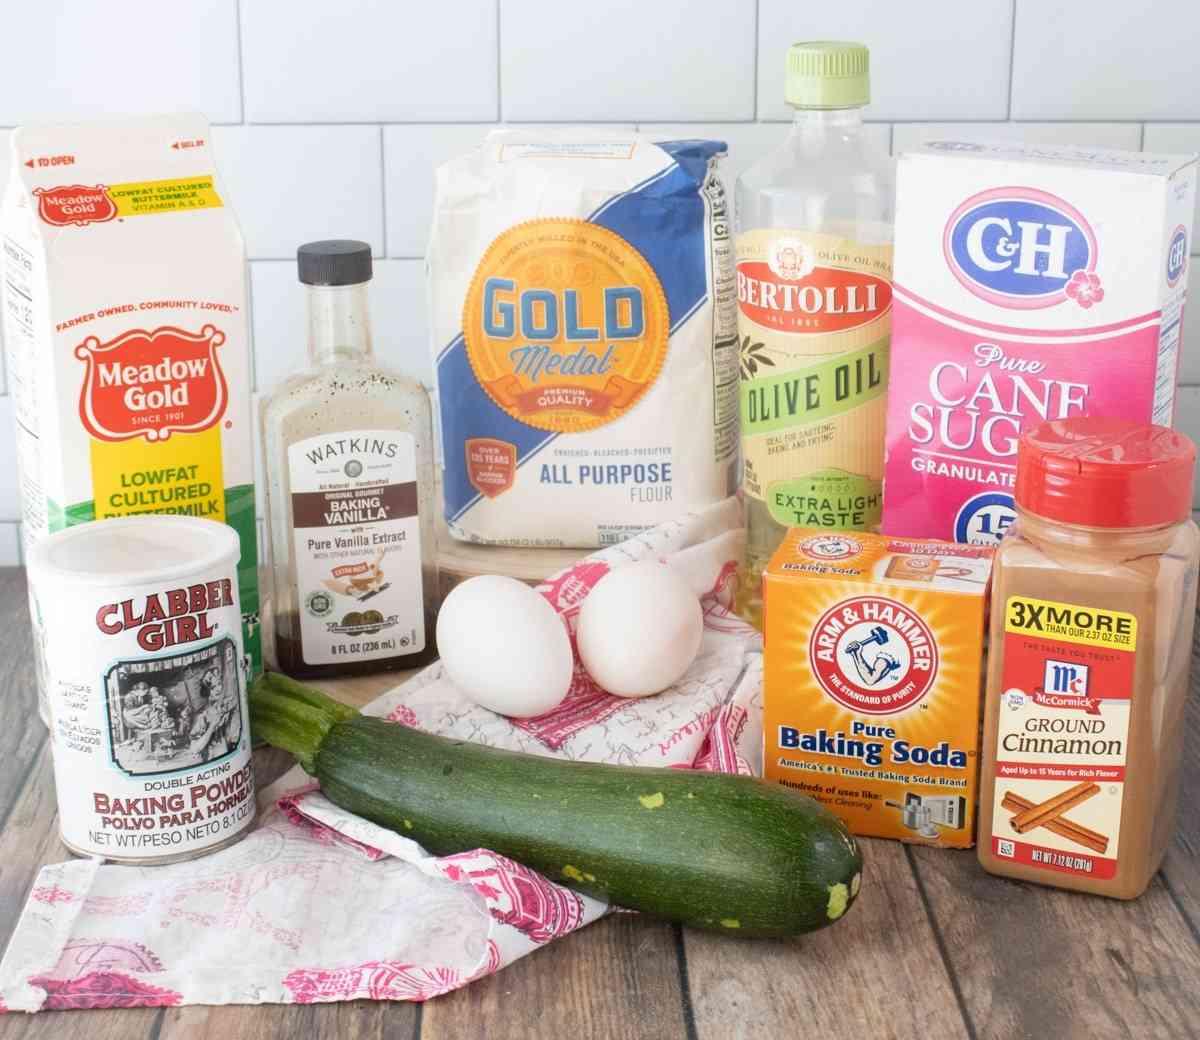 All the ingredients to make zucchini pancakes.